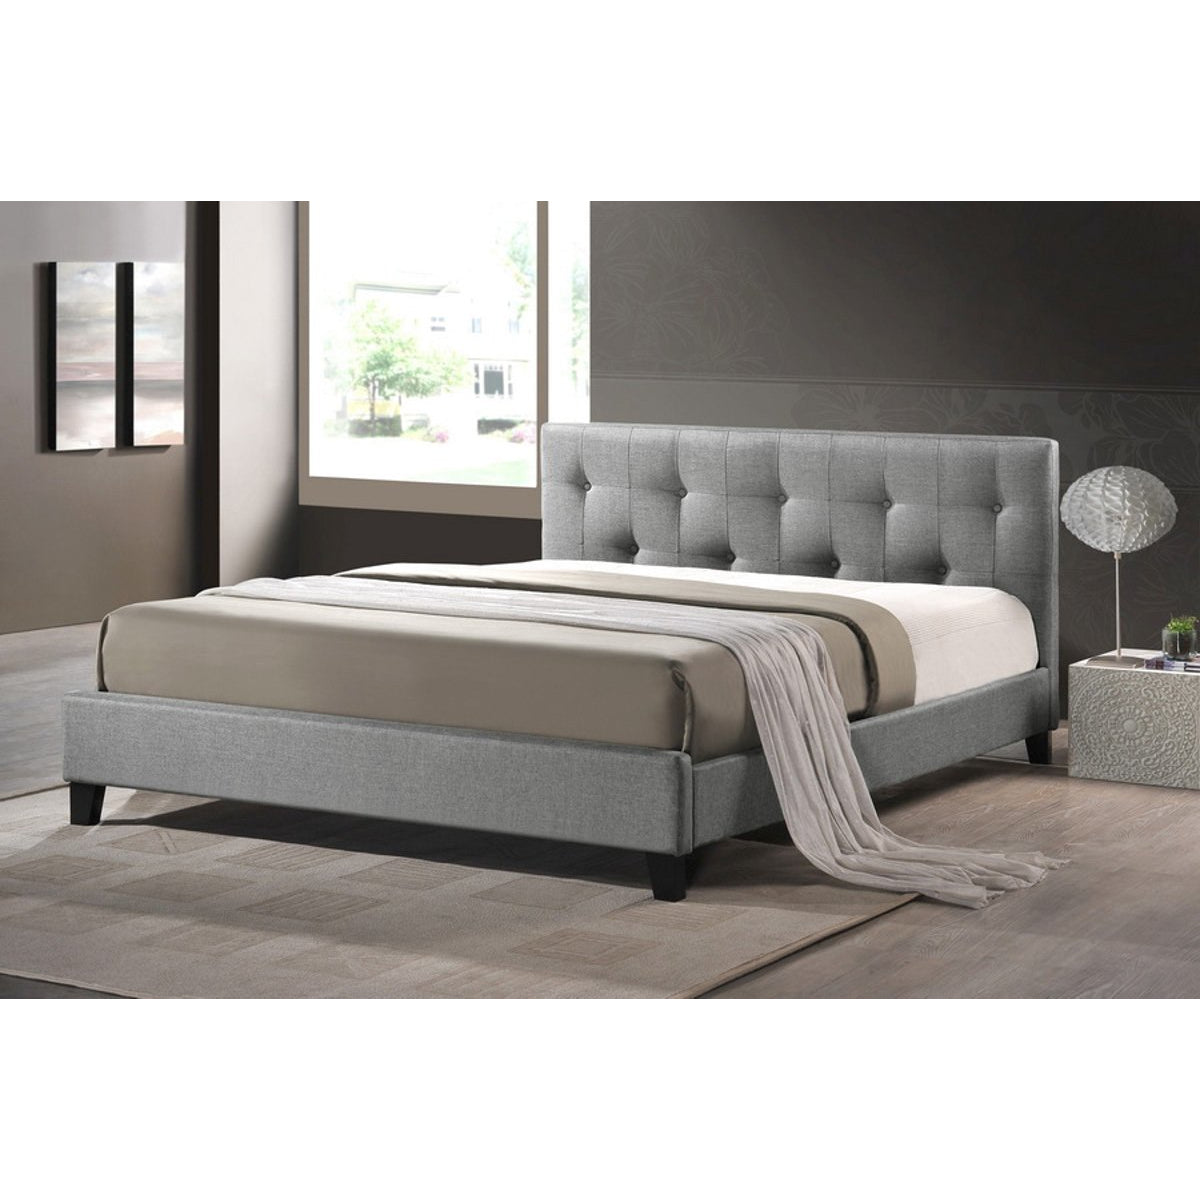 Baxton Studio Annette Gray Linen Modern Bed with Upholstered Headboard - Full Size Baxton Studio-beds-Minimal And Modern - 1